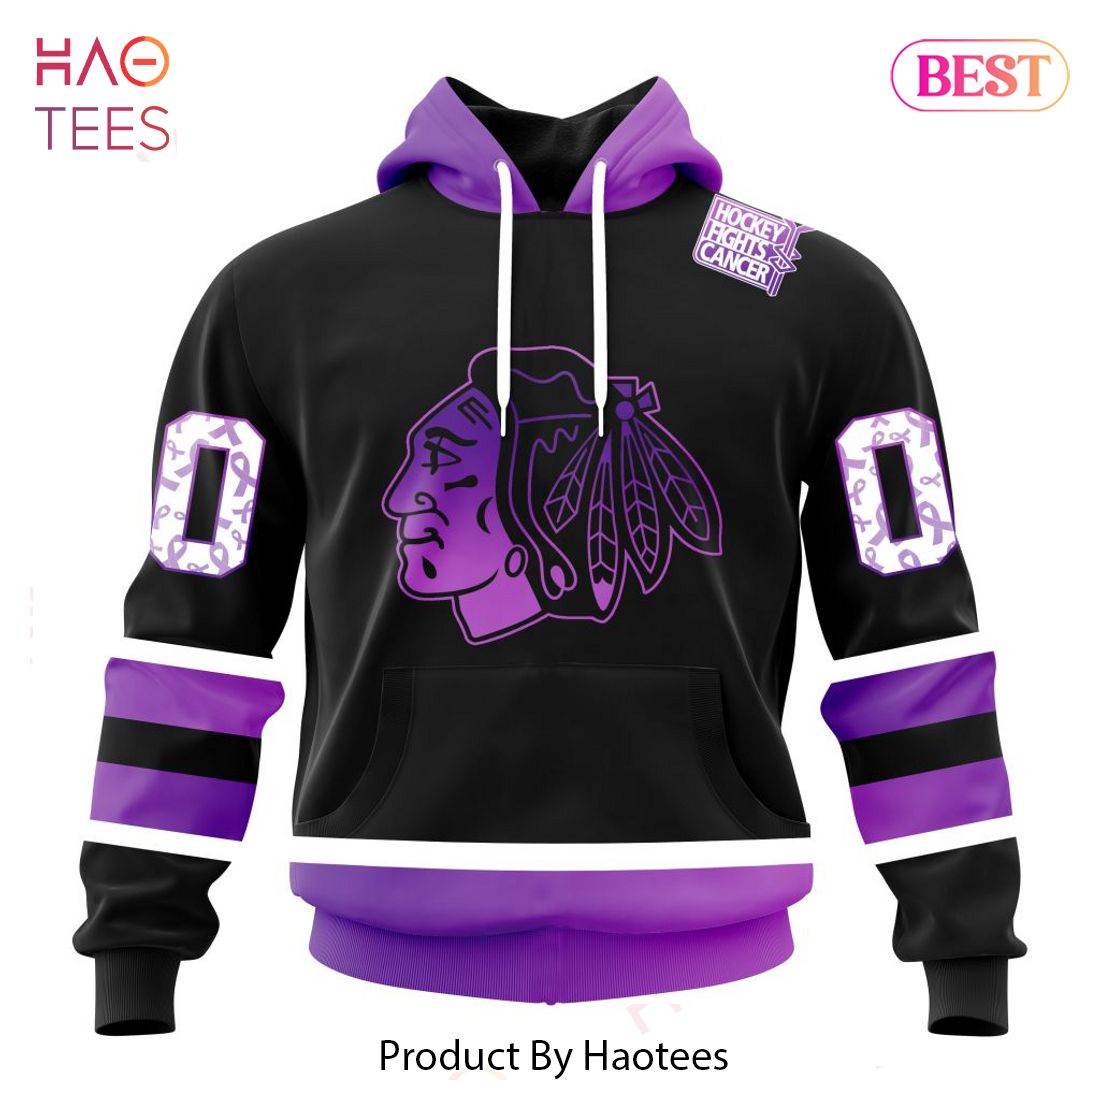 BEST NHL Chicago Blackhawks Special Black Hockey Fights Cancer Kits 3D Hoodie